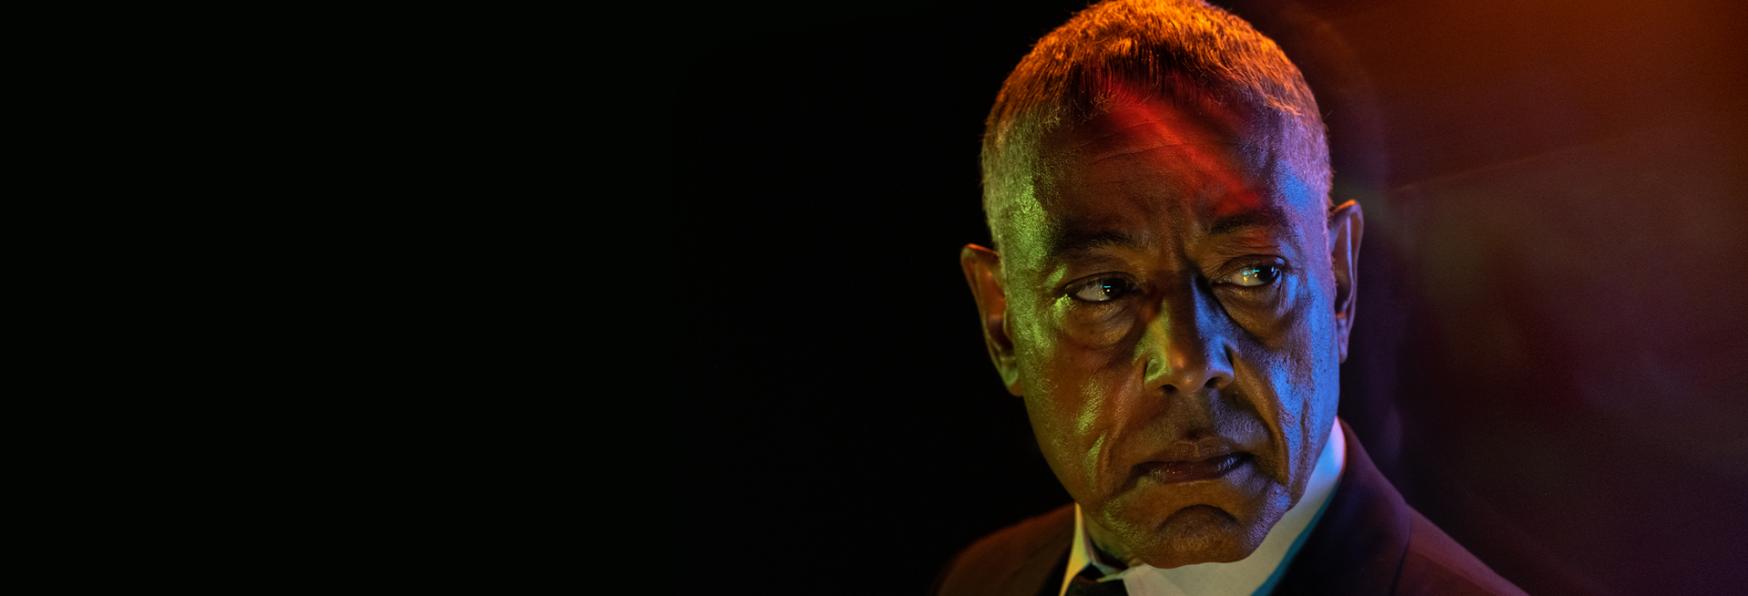 Parish: Teaser and First Images of the new TV Series with Giancarlo Esposito